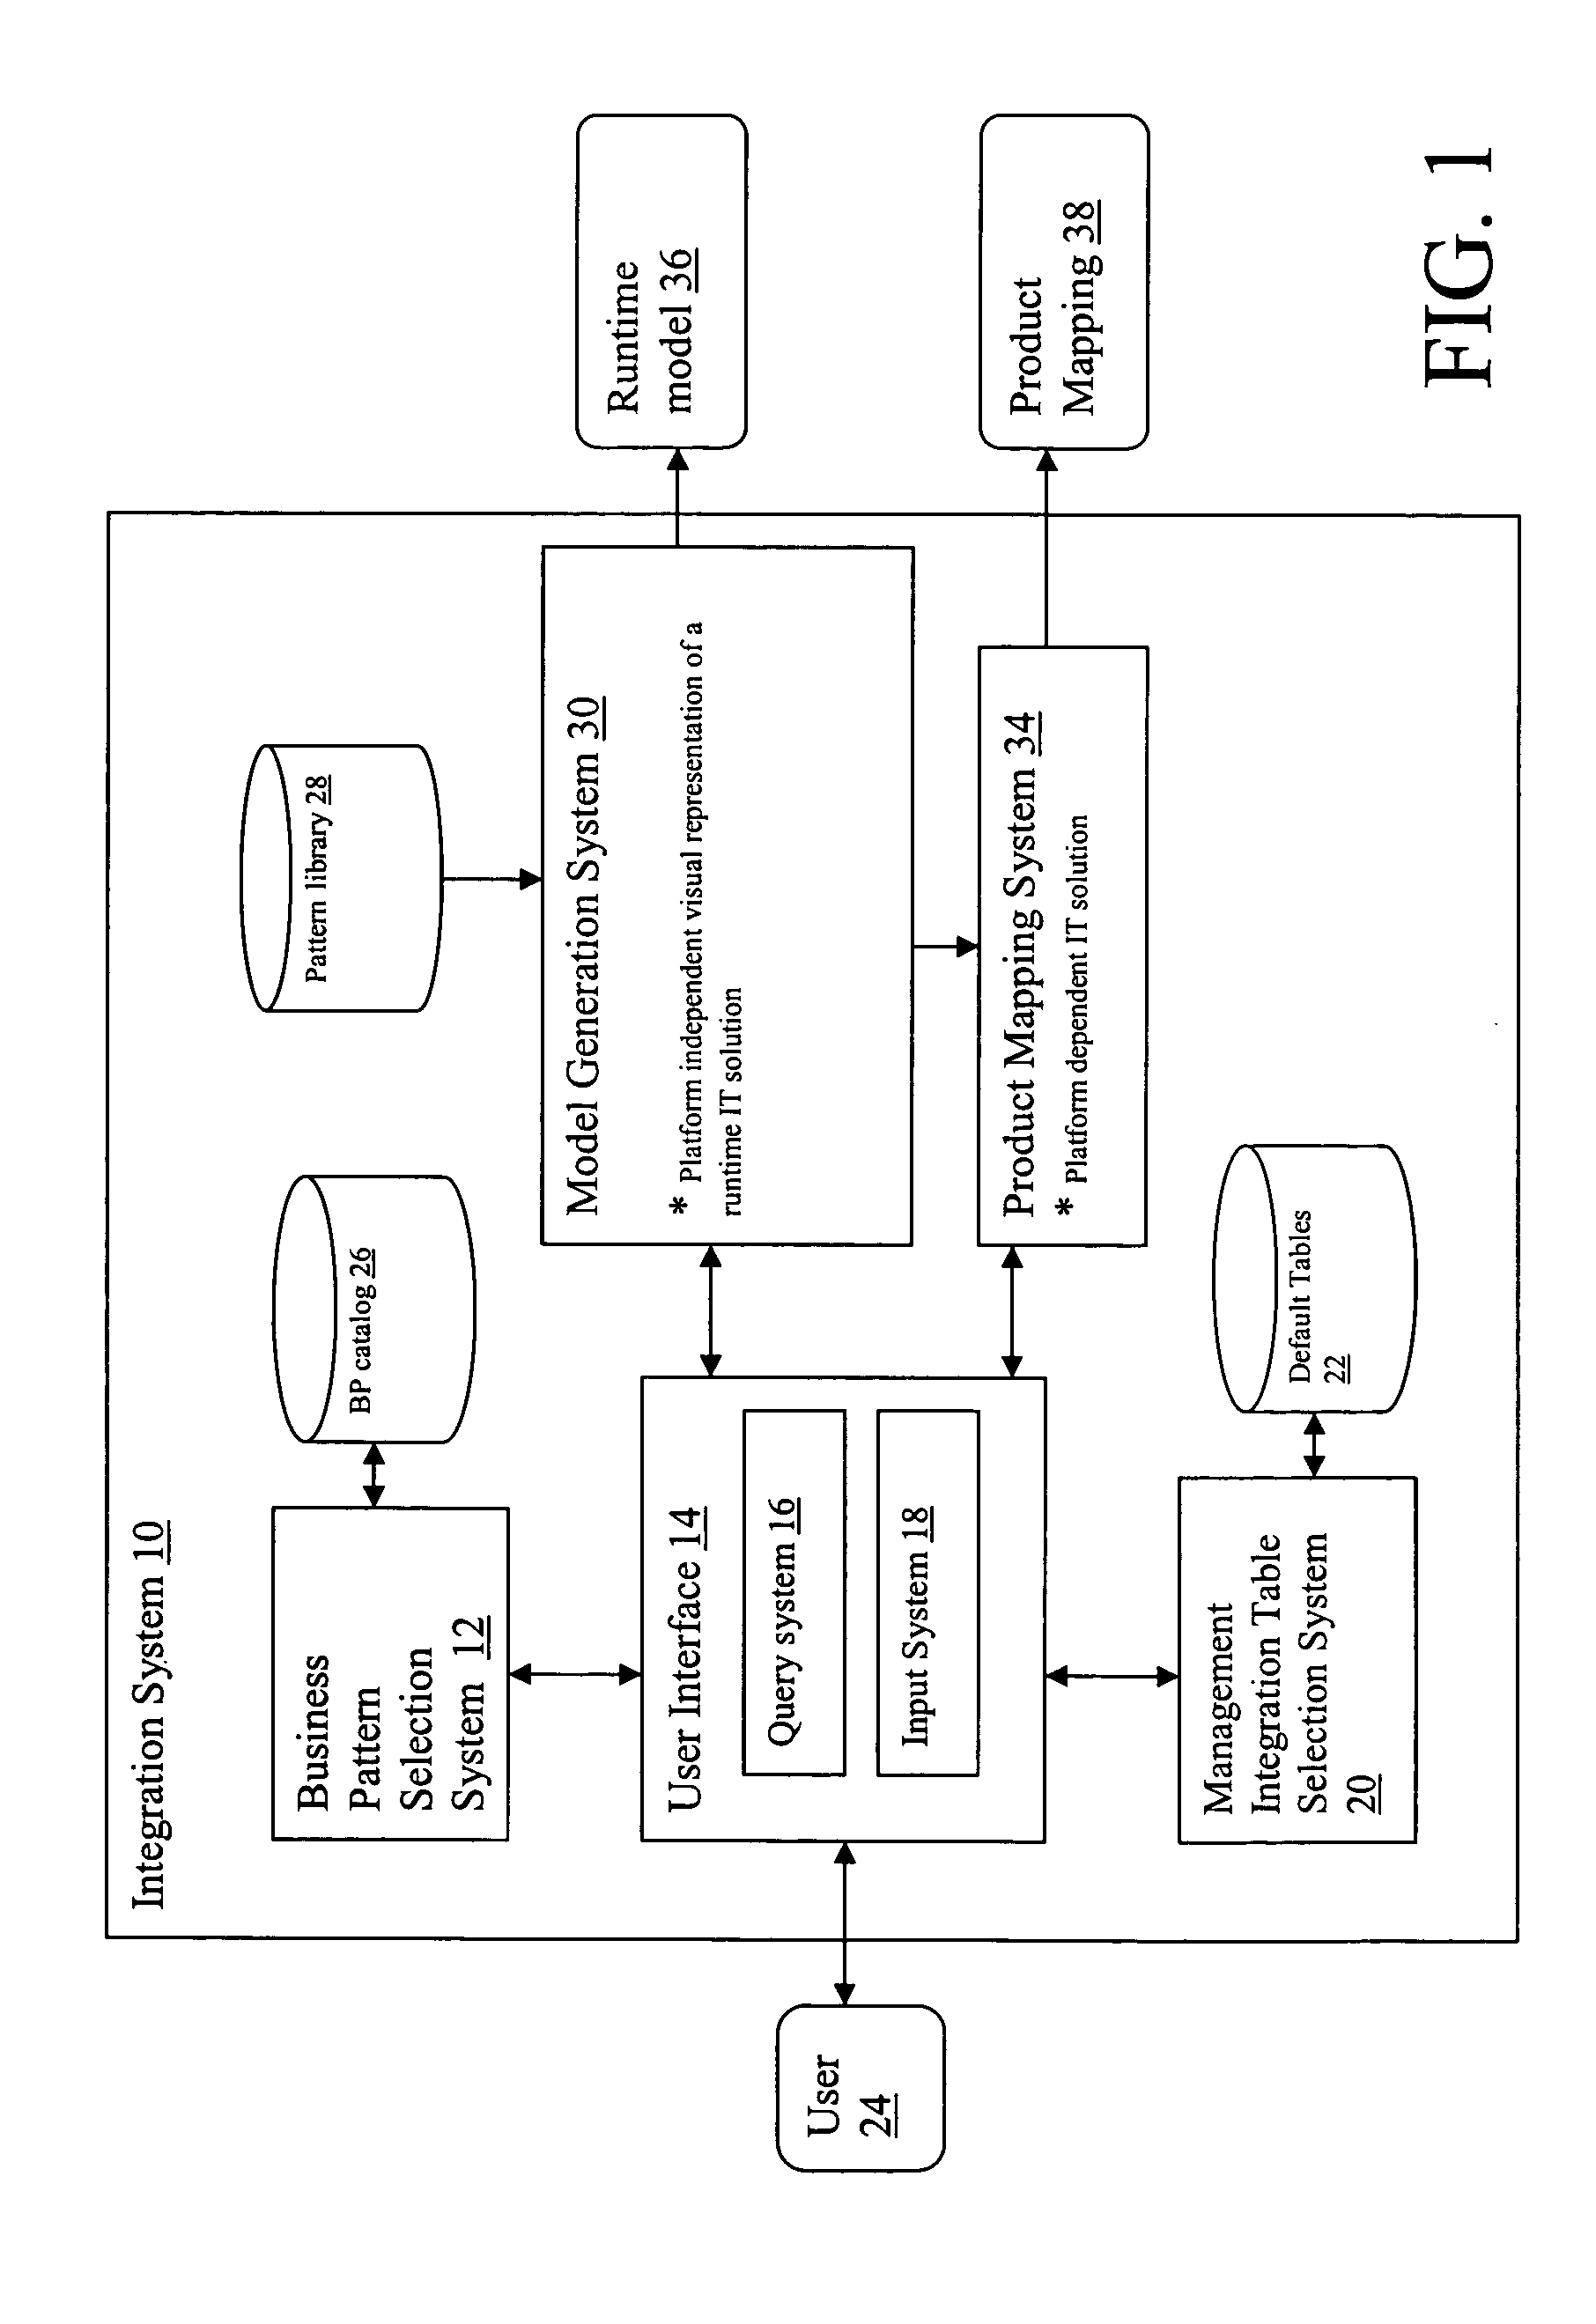 System and method for designing secure solutions using patterns